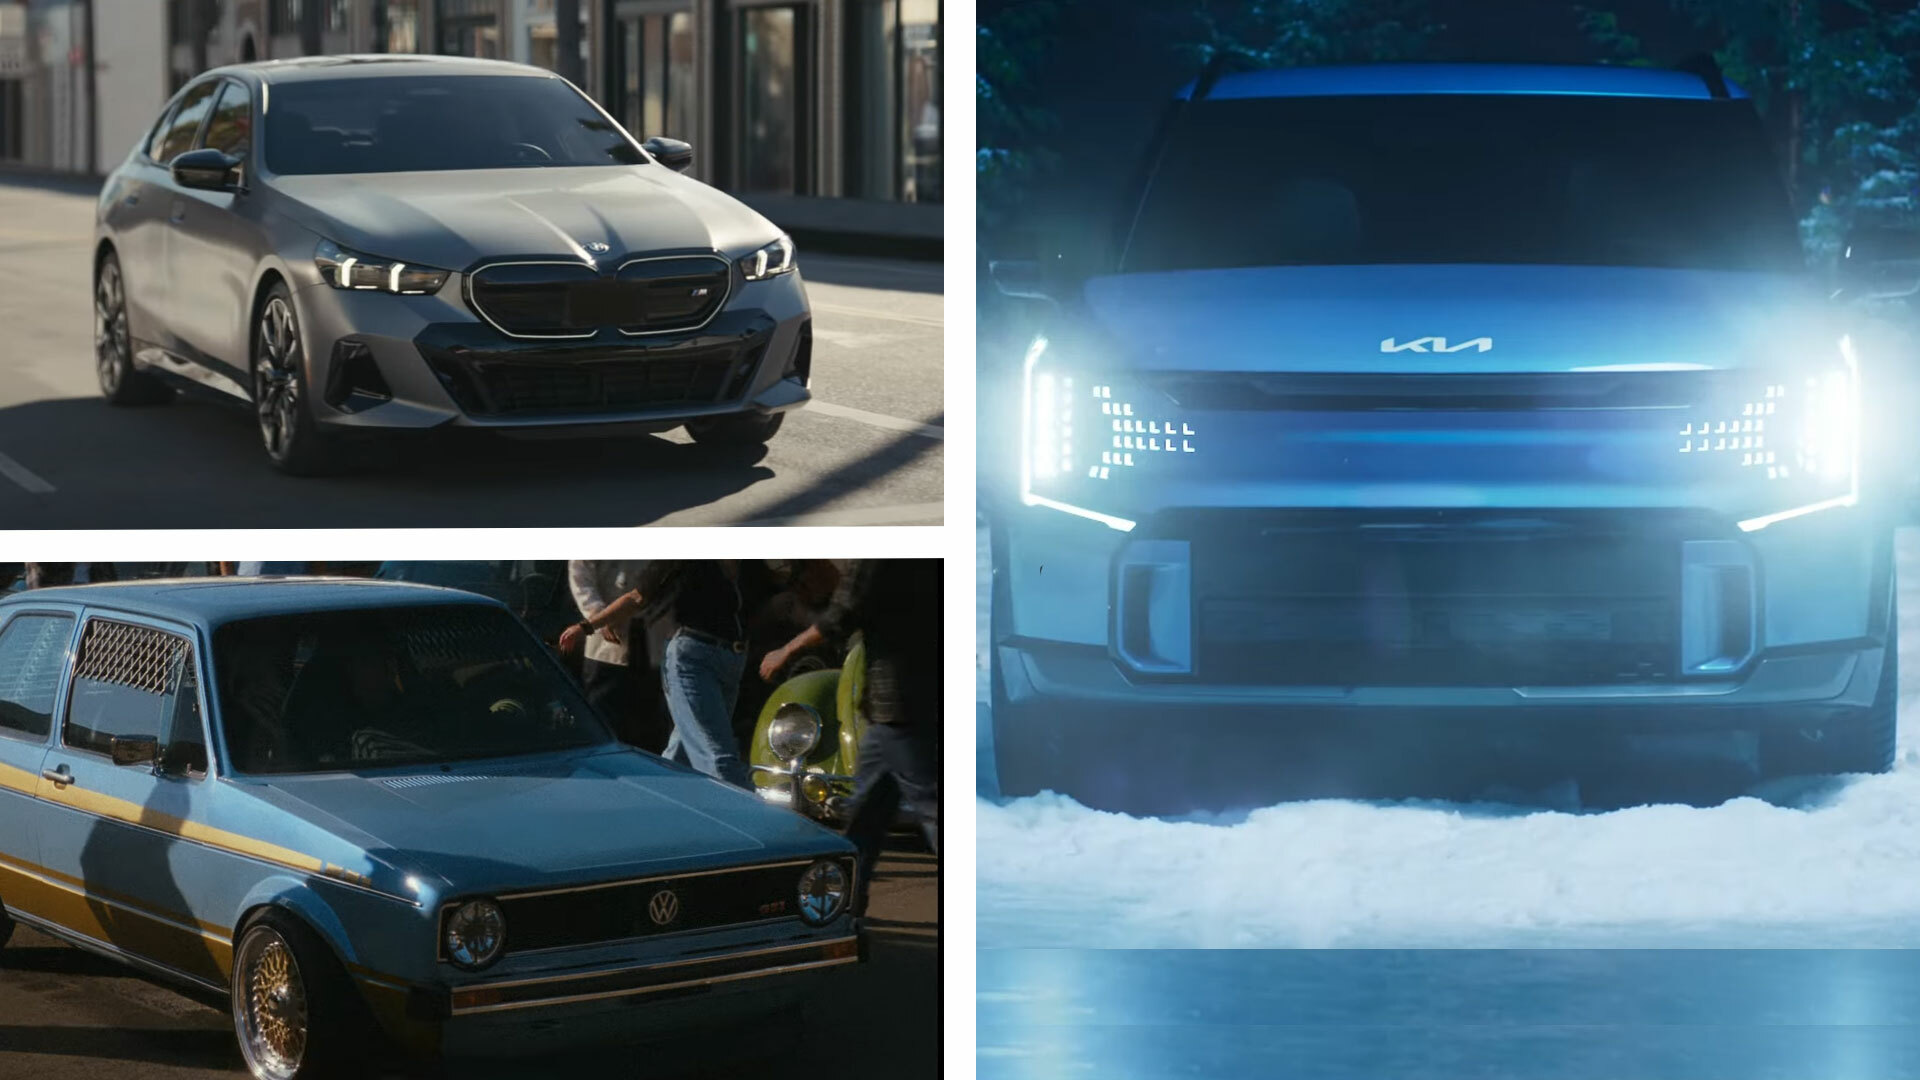 BMW, Kia, And VW Drop New Super Bowl Teasers Carscoops